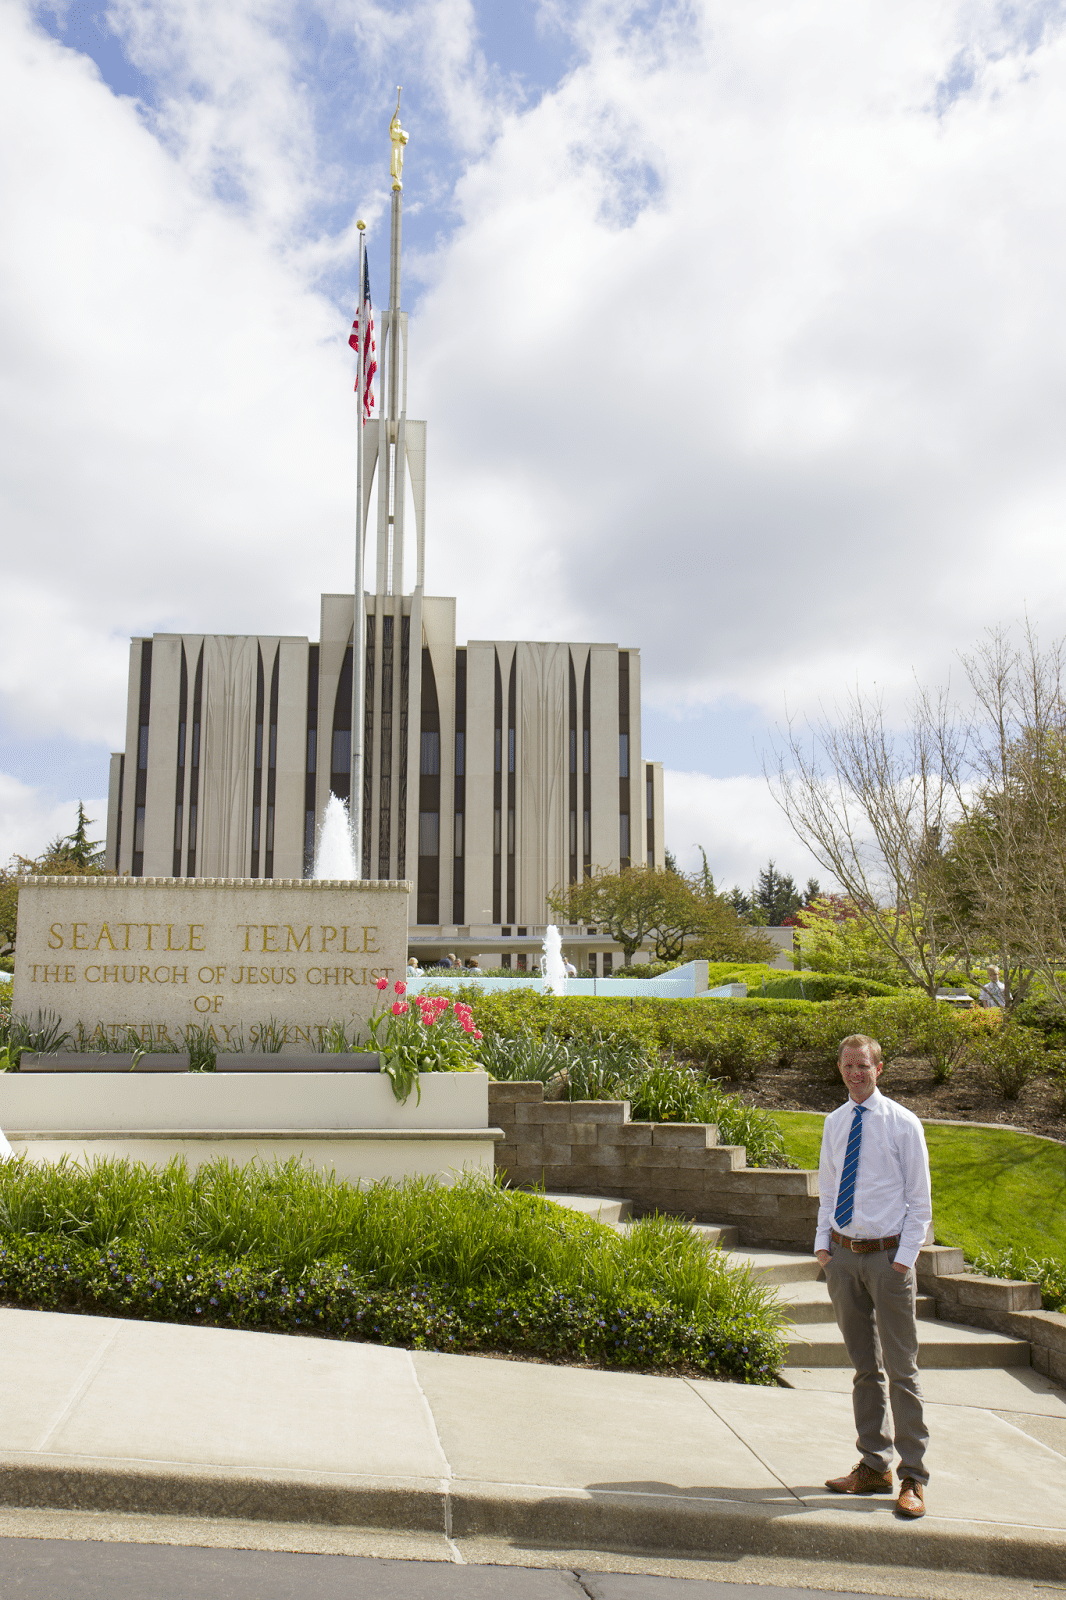 The Seattle LDS Temple